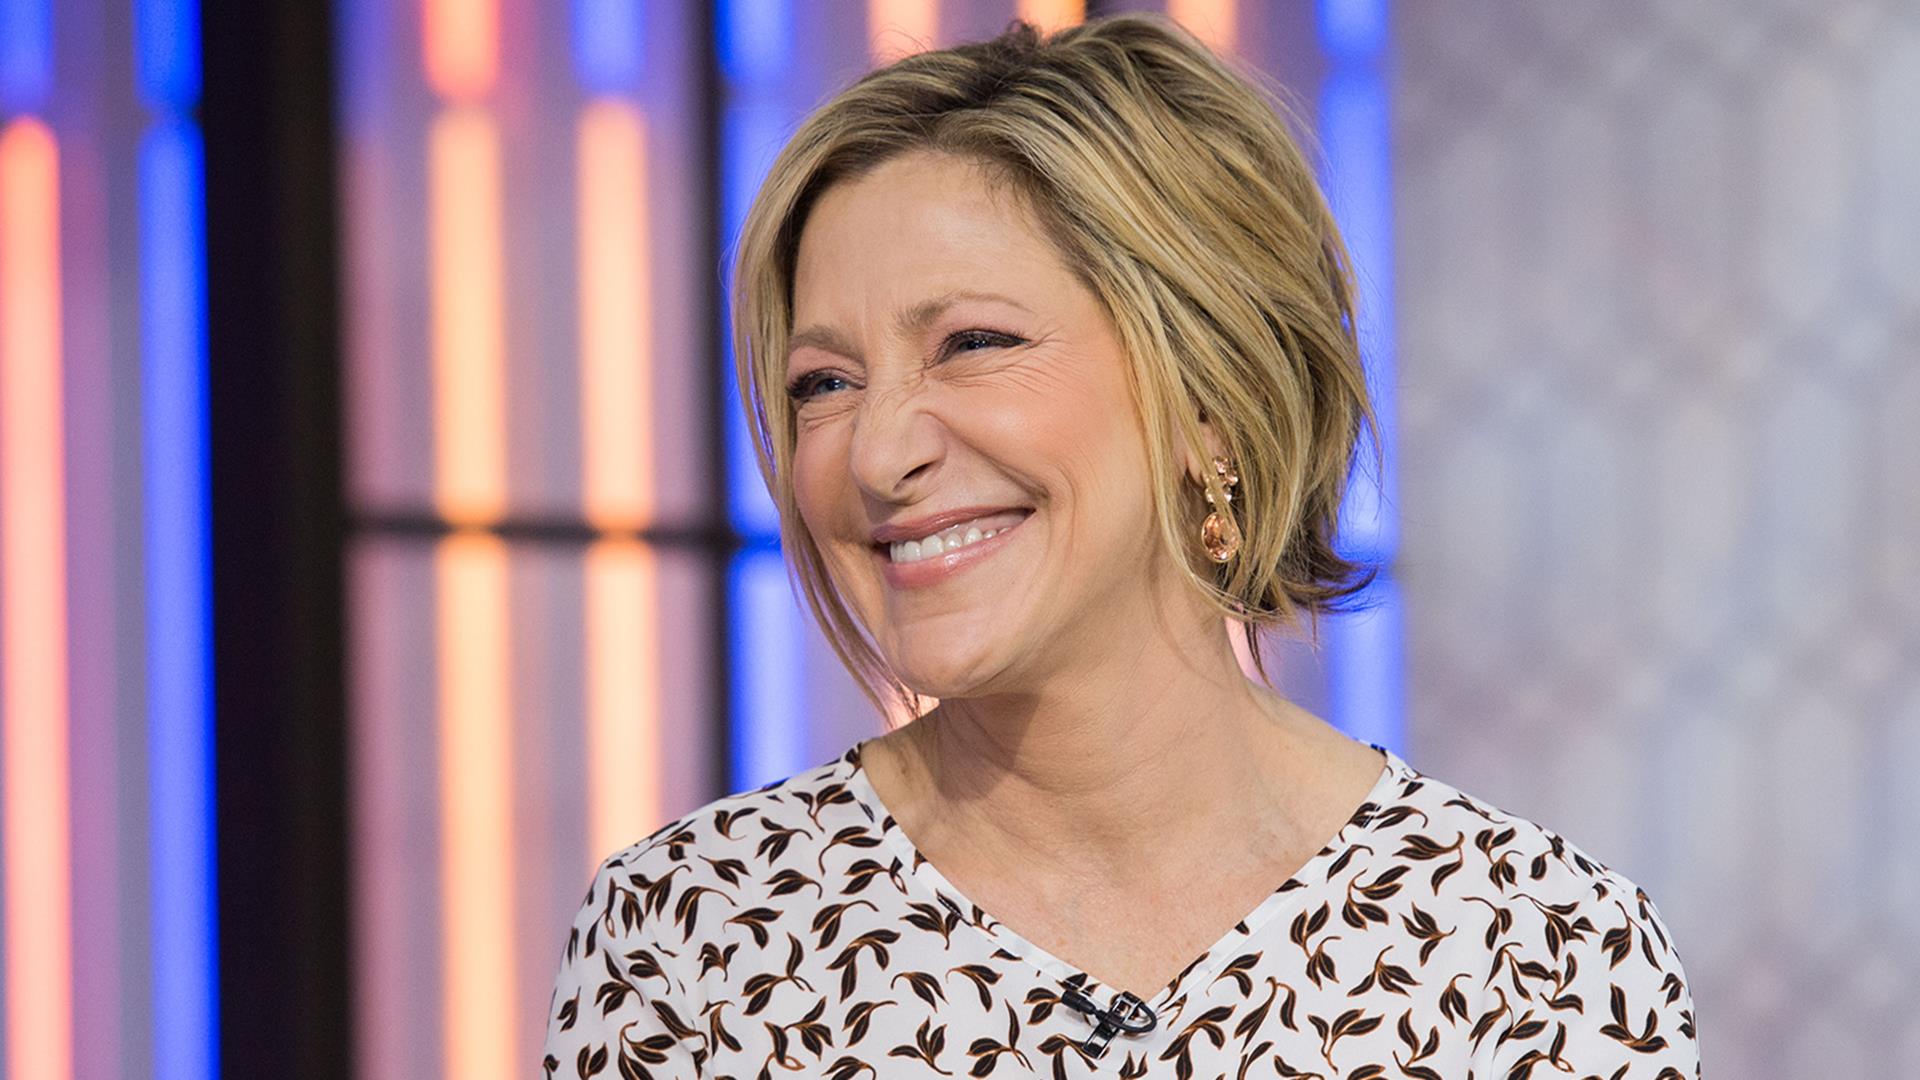 Edie Falco: Working with Robert De Niro on 'The Comedian' was 'intimidating'